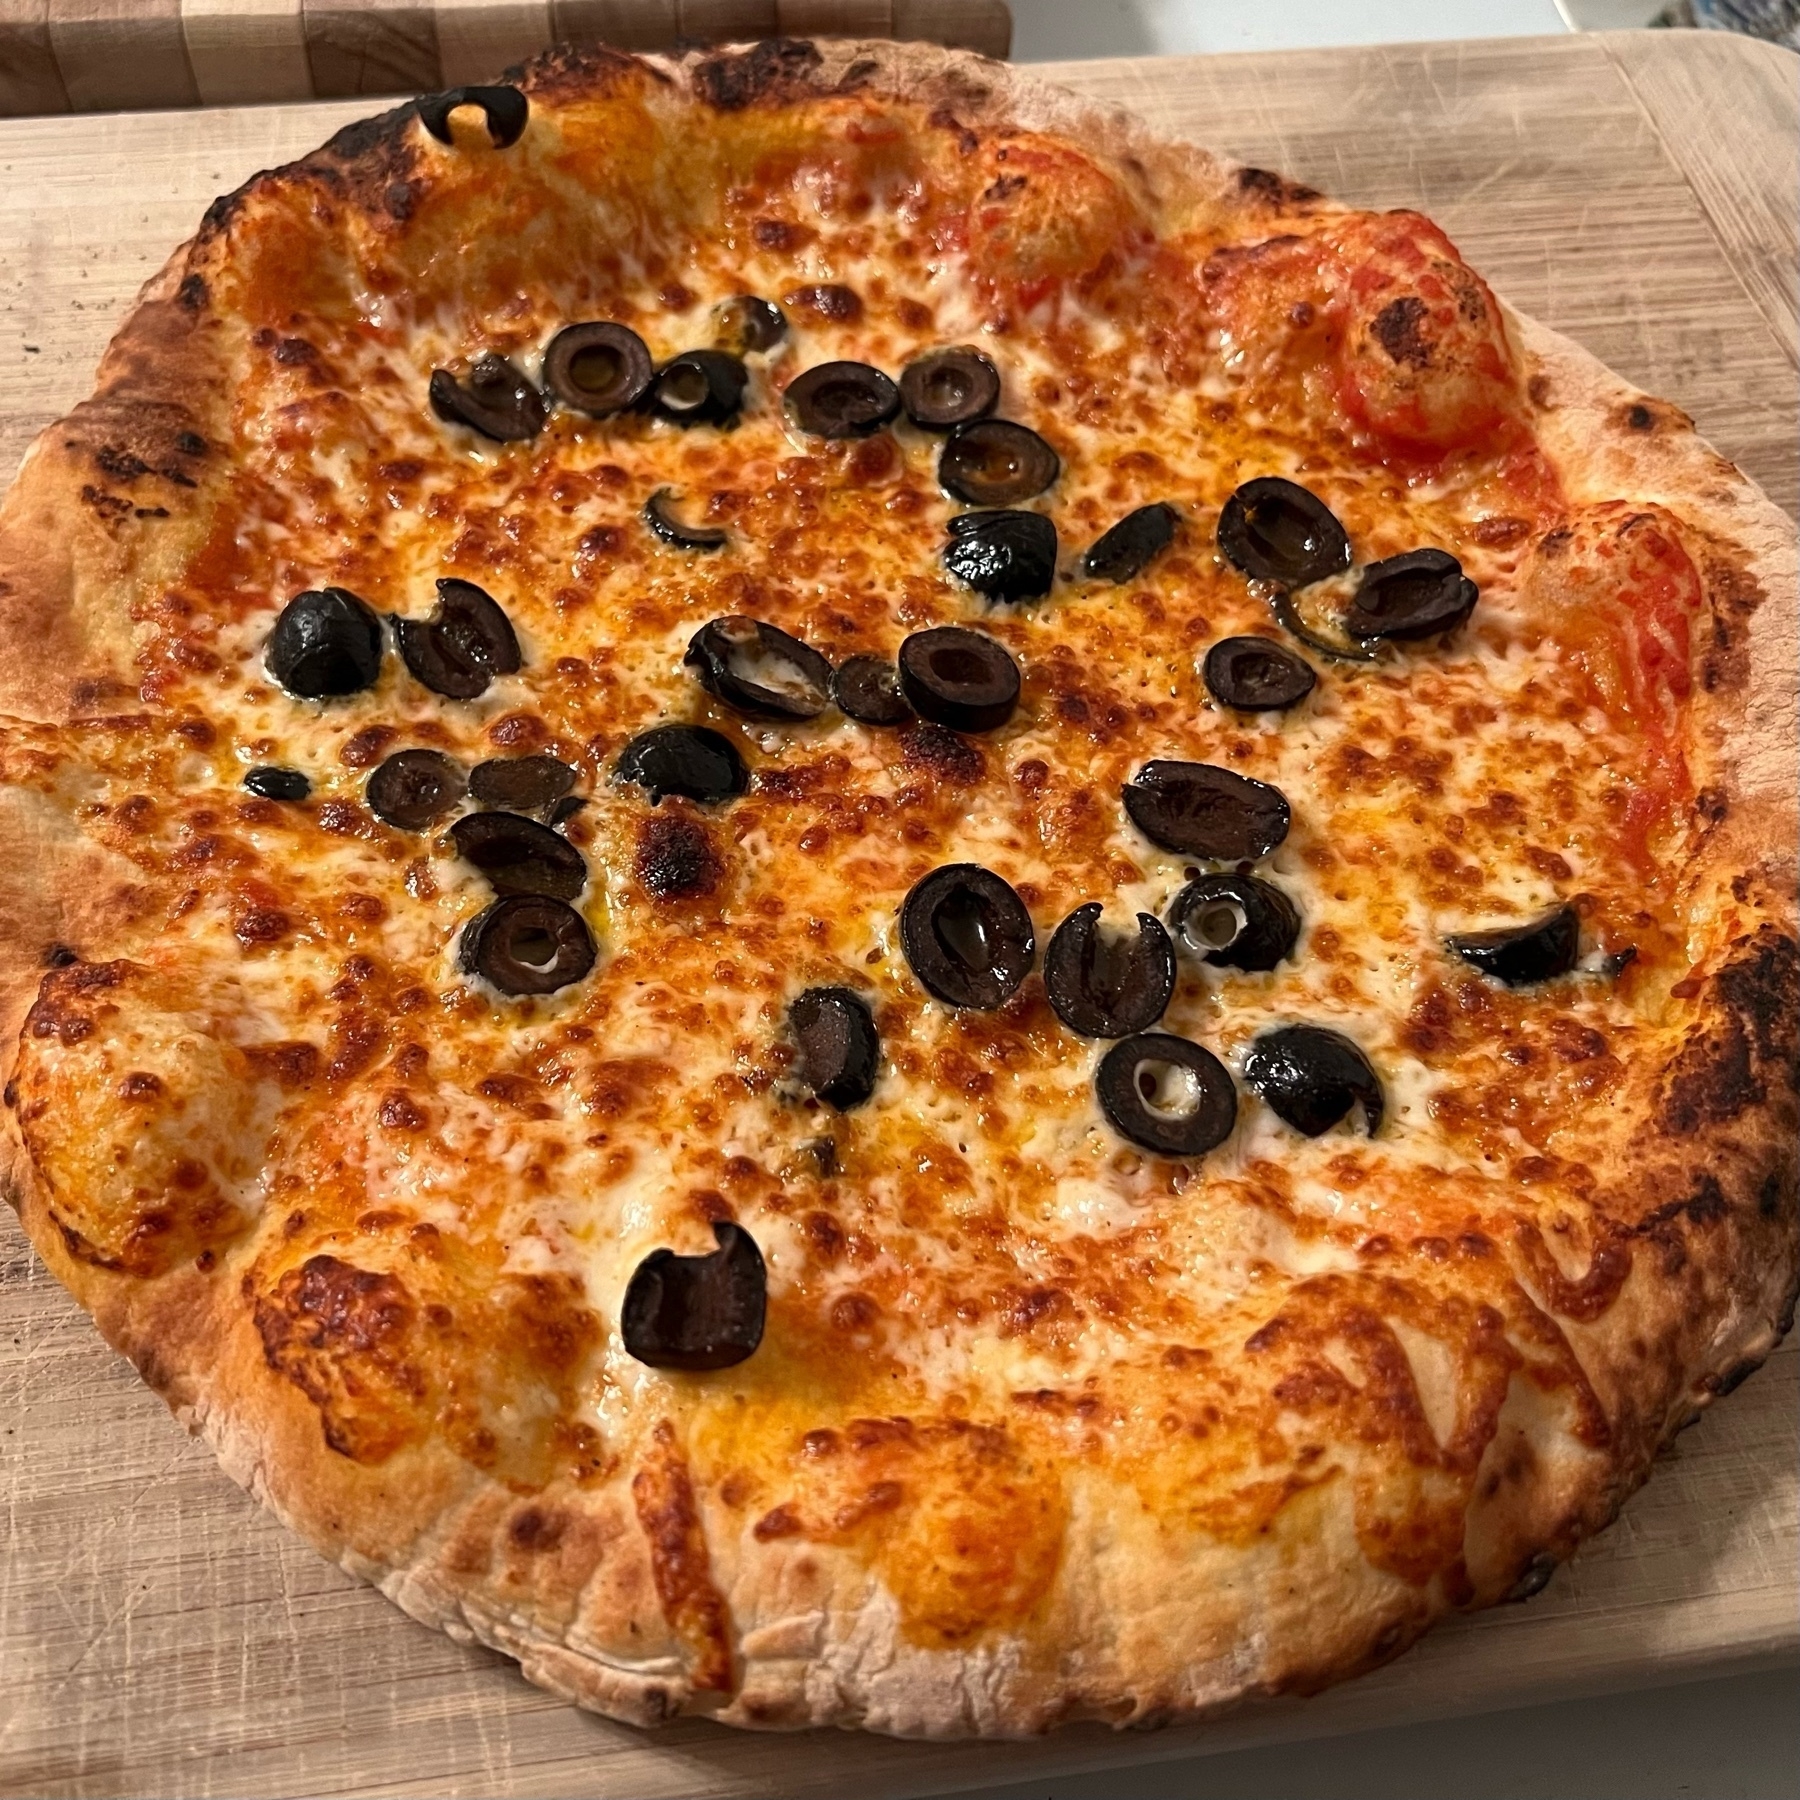 olive and cheese pizza with puffy crusts resting on a wooden cutting board